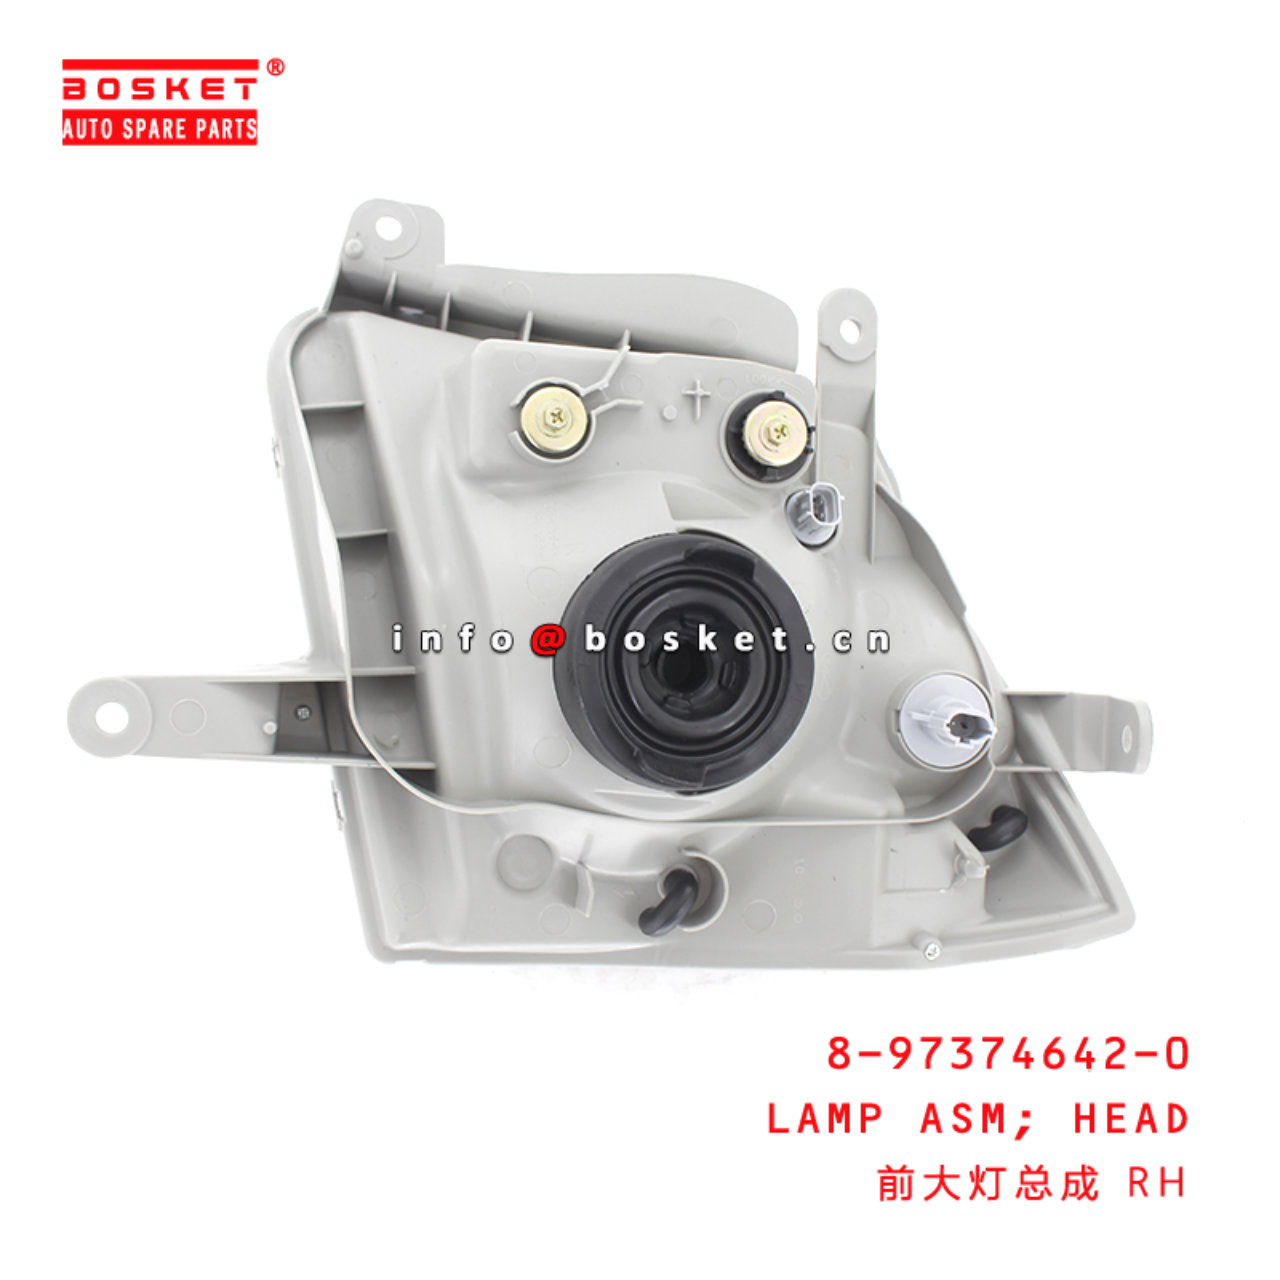 8-97374642-0 Head Lamp Assembly Suitable for ISUZU DMAX 06  8973746420